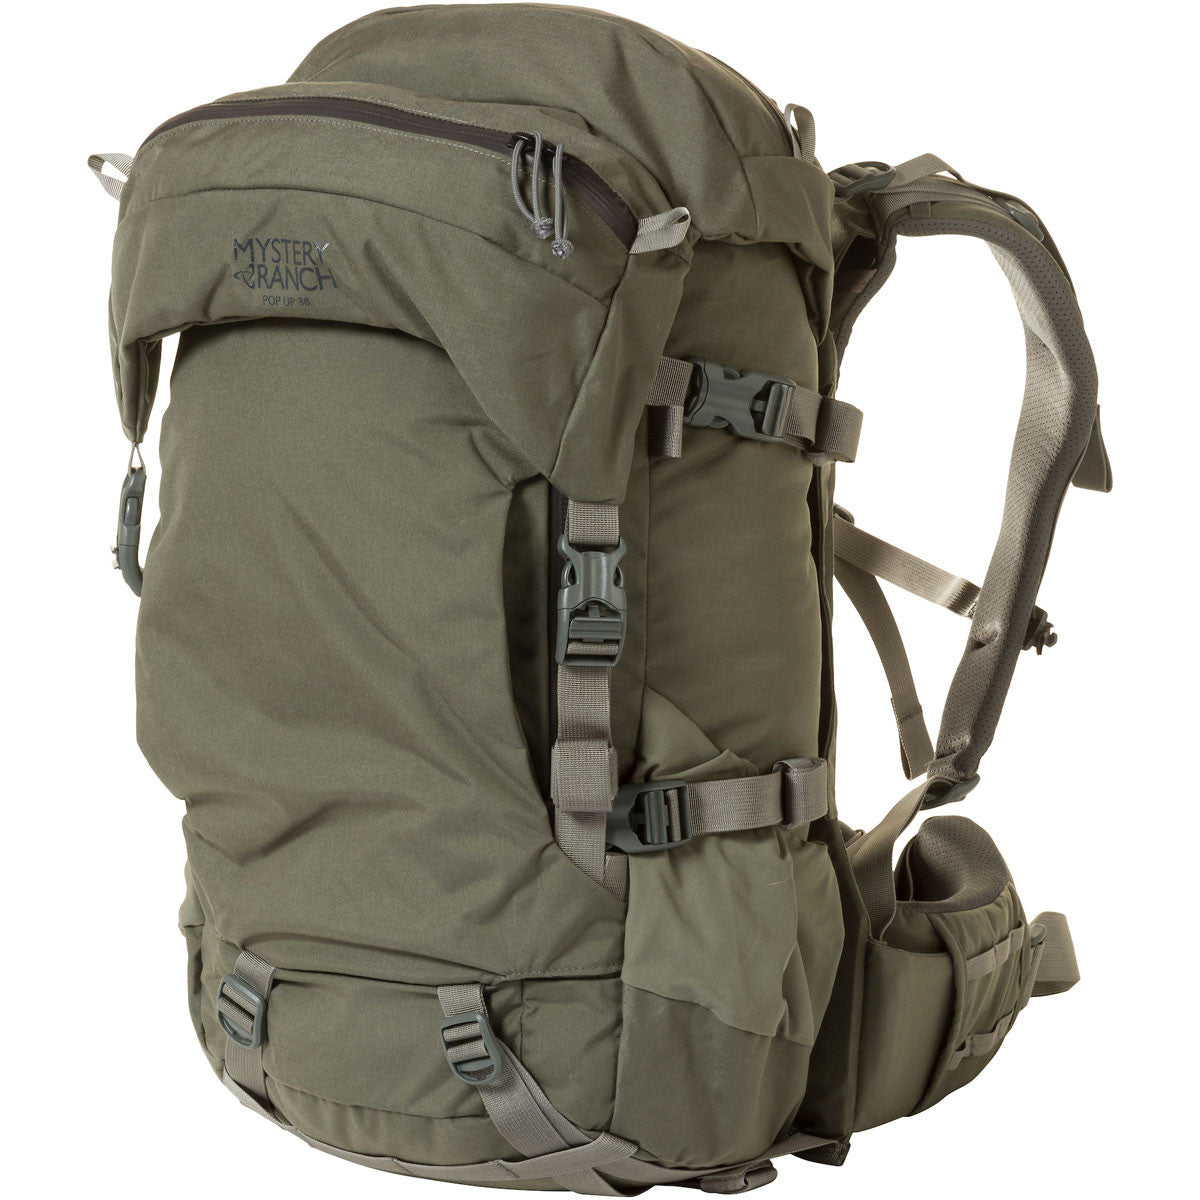 Mystery Ranch Pop Up 38 Backpack - Coyote - M / Coyote - Mansfield Hunting & Fishing - Products to prepare for Corona Virus